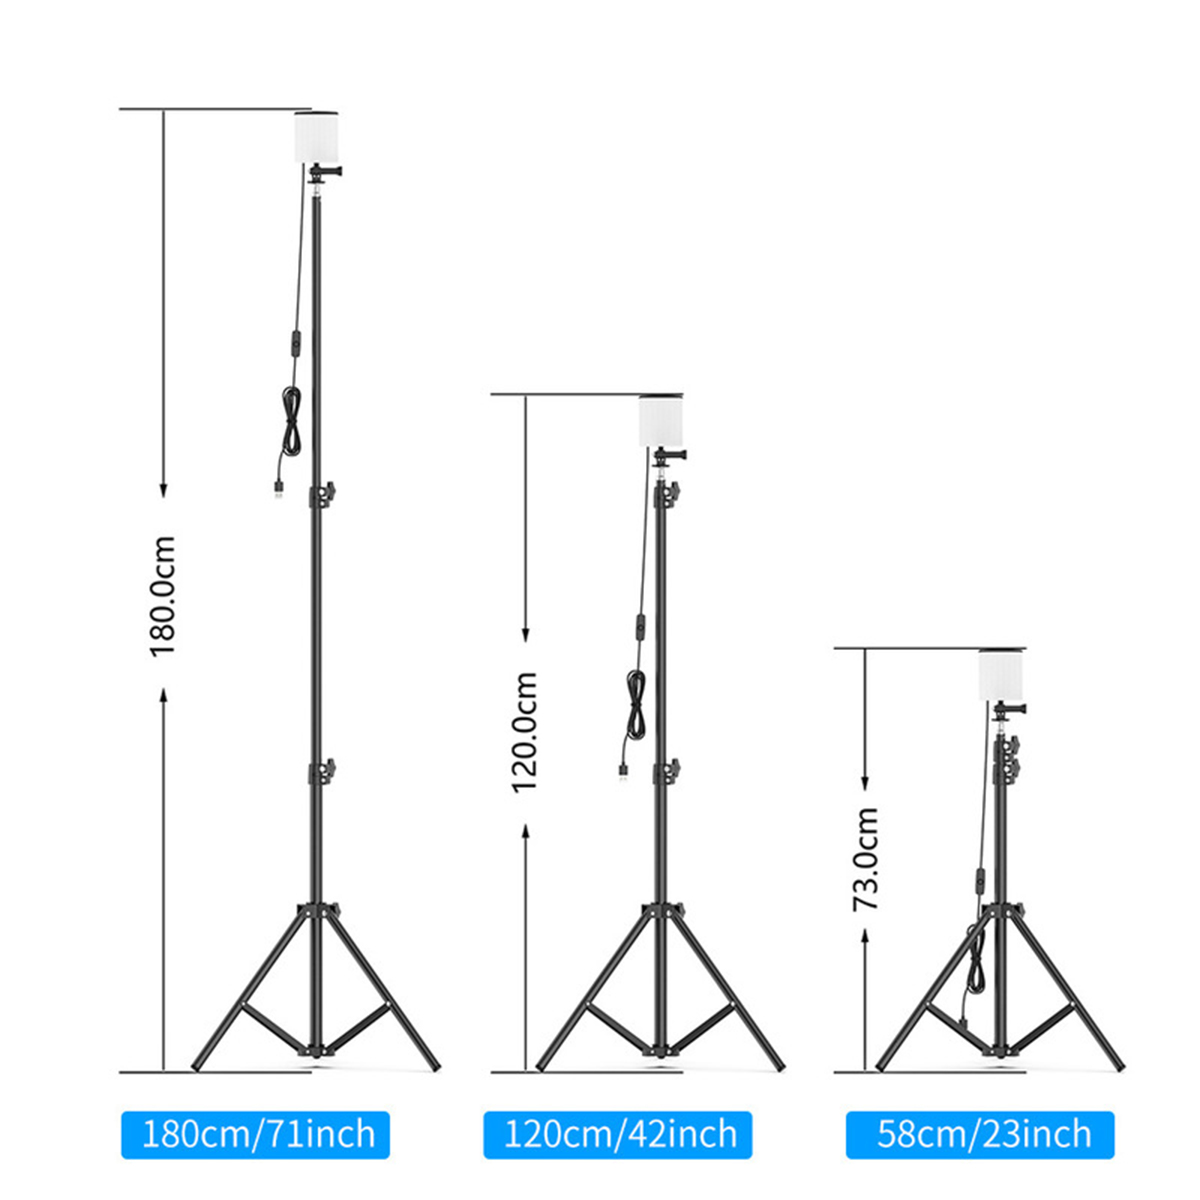 1680LM-Multifunctional-Camping-Light-Retractable-Tripod-Stand-USB-Rechargeable-Waterproof-Outdoor-Po-1898532-9